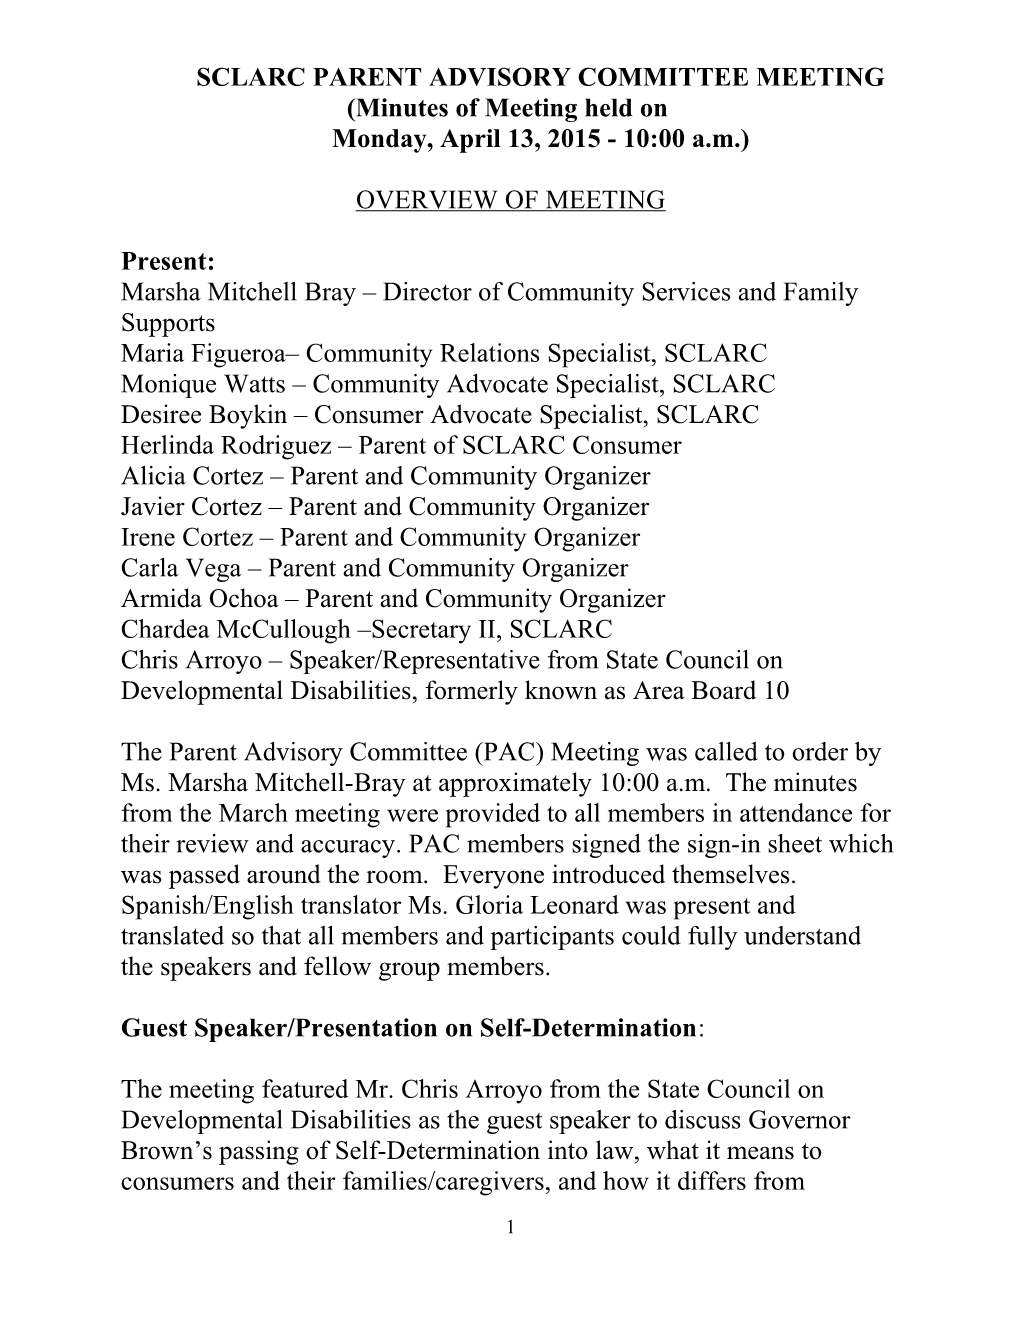 SCLARC PARENT ADVISORY COMMITTEE MEETING (Minutes of Meeting Held On